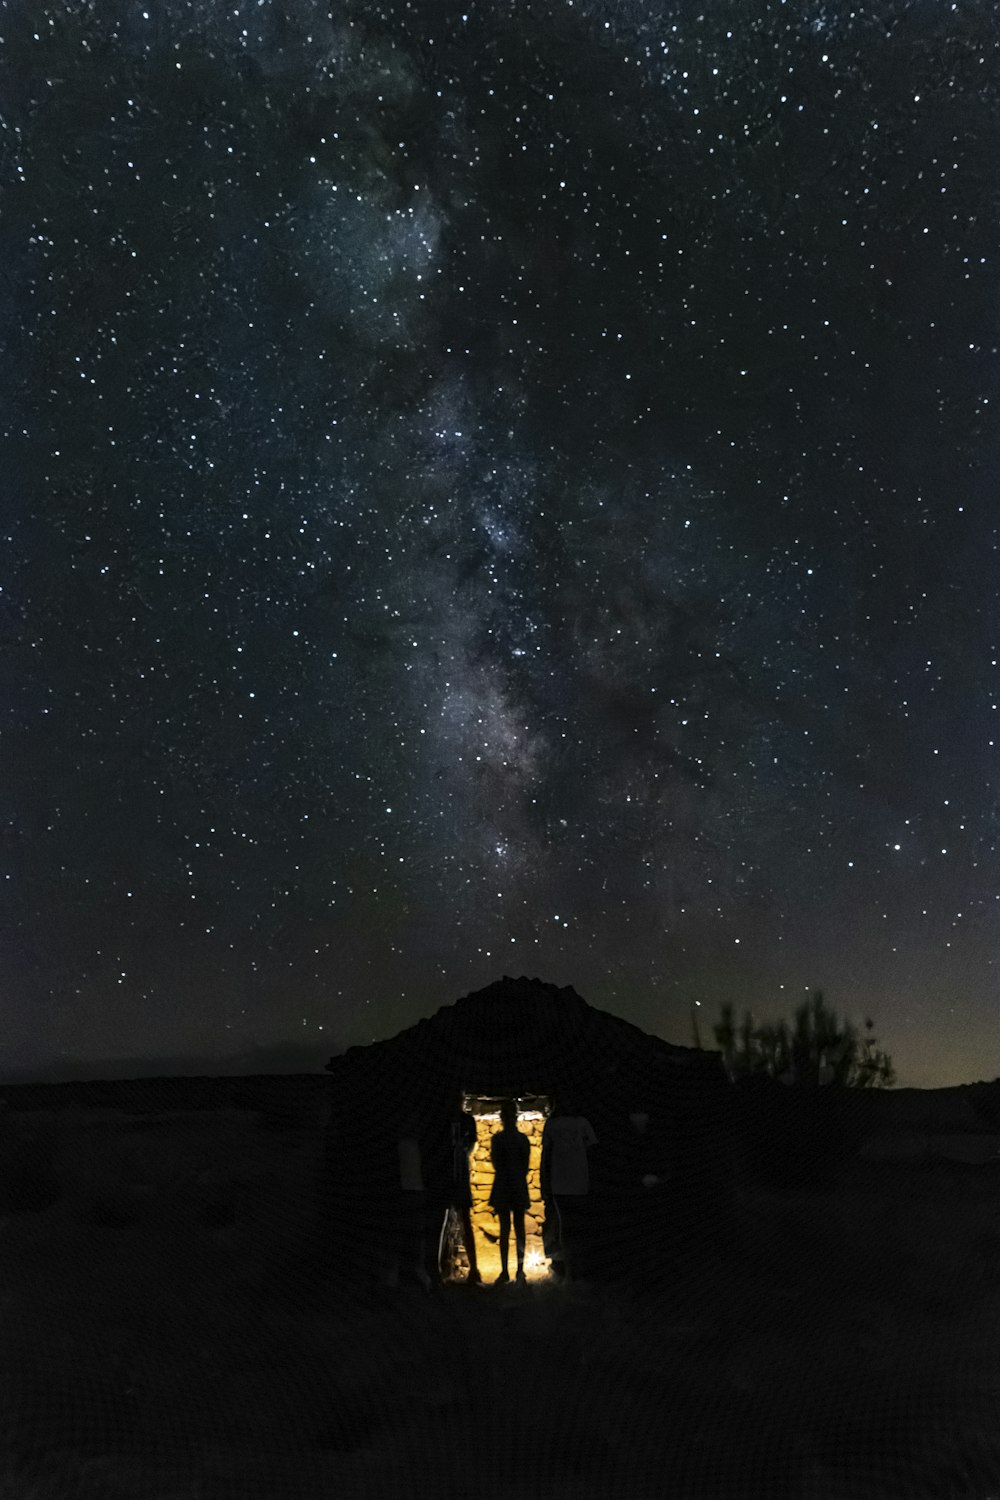 a group of people standing in front of a house under a starry sky